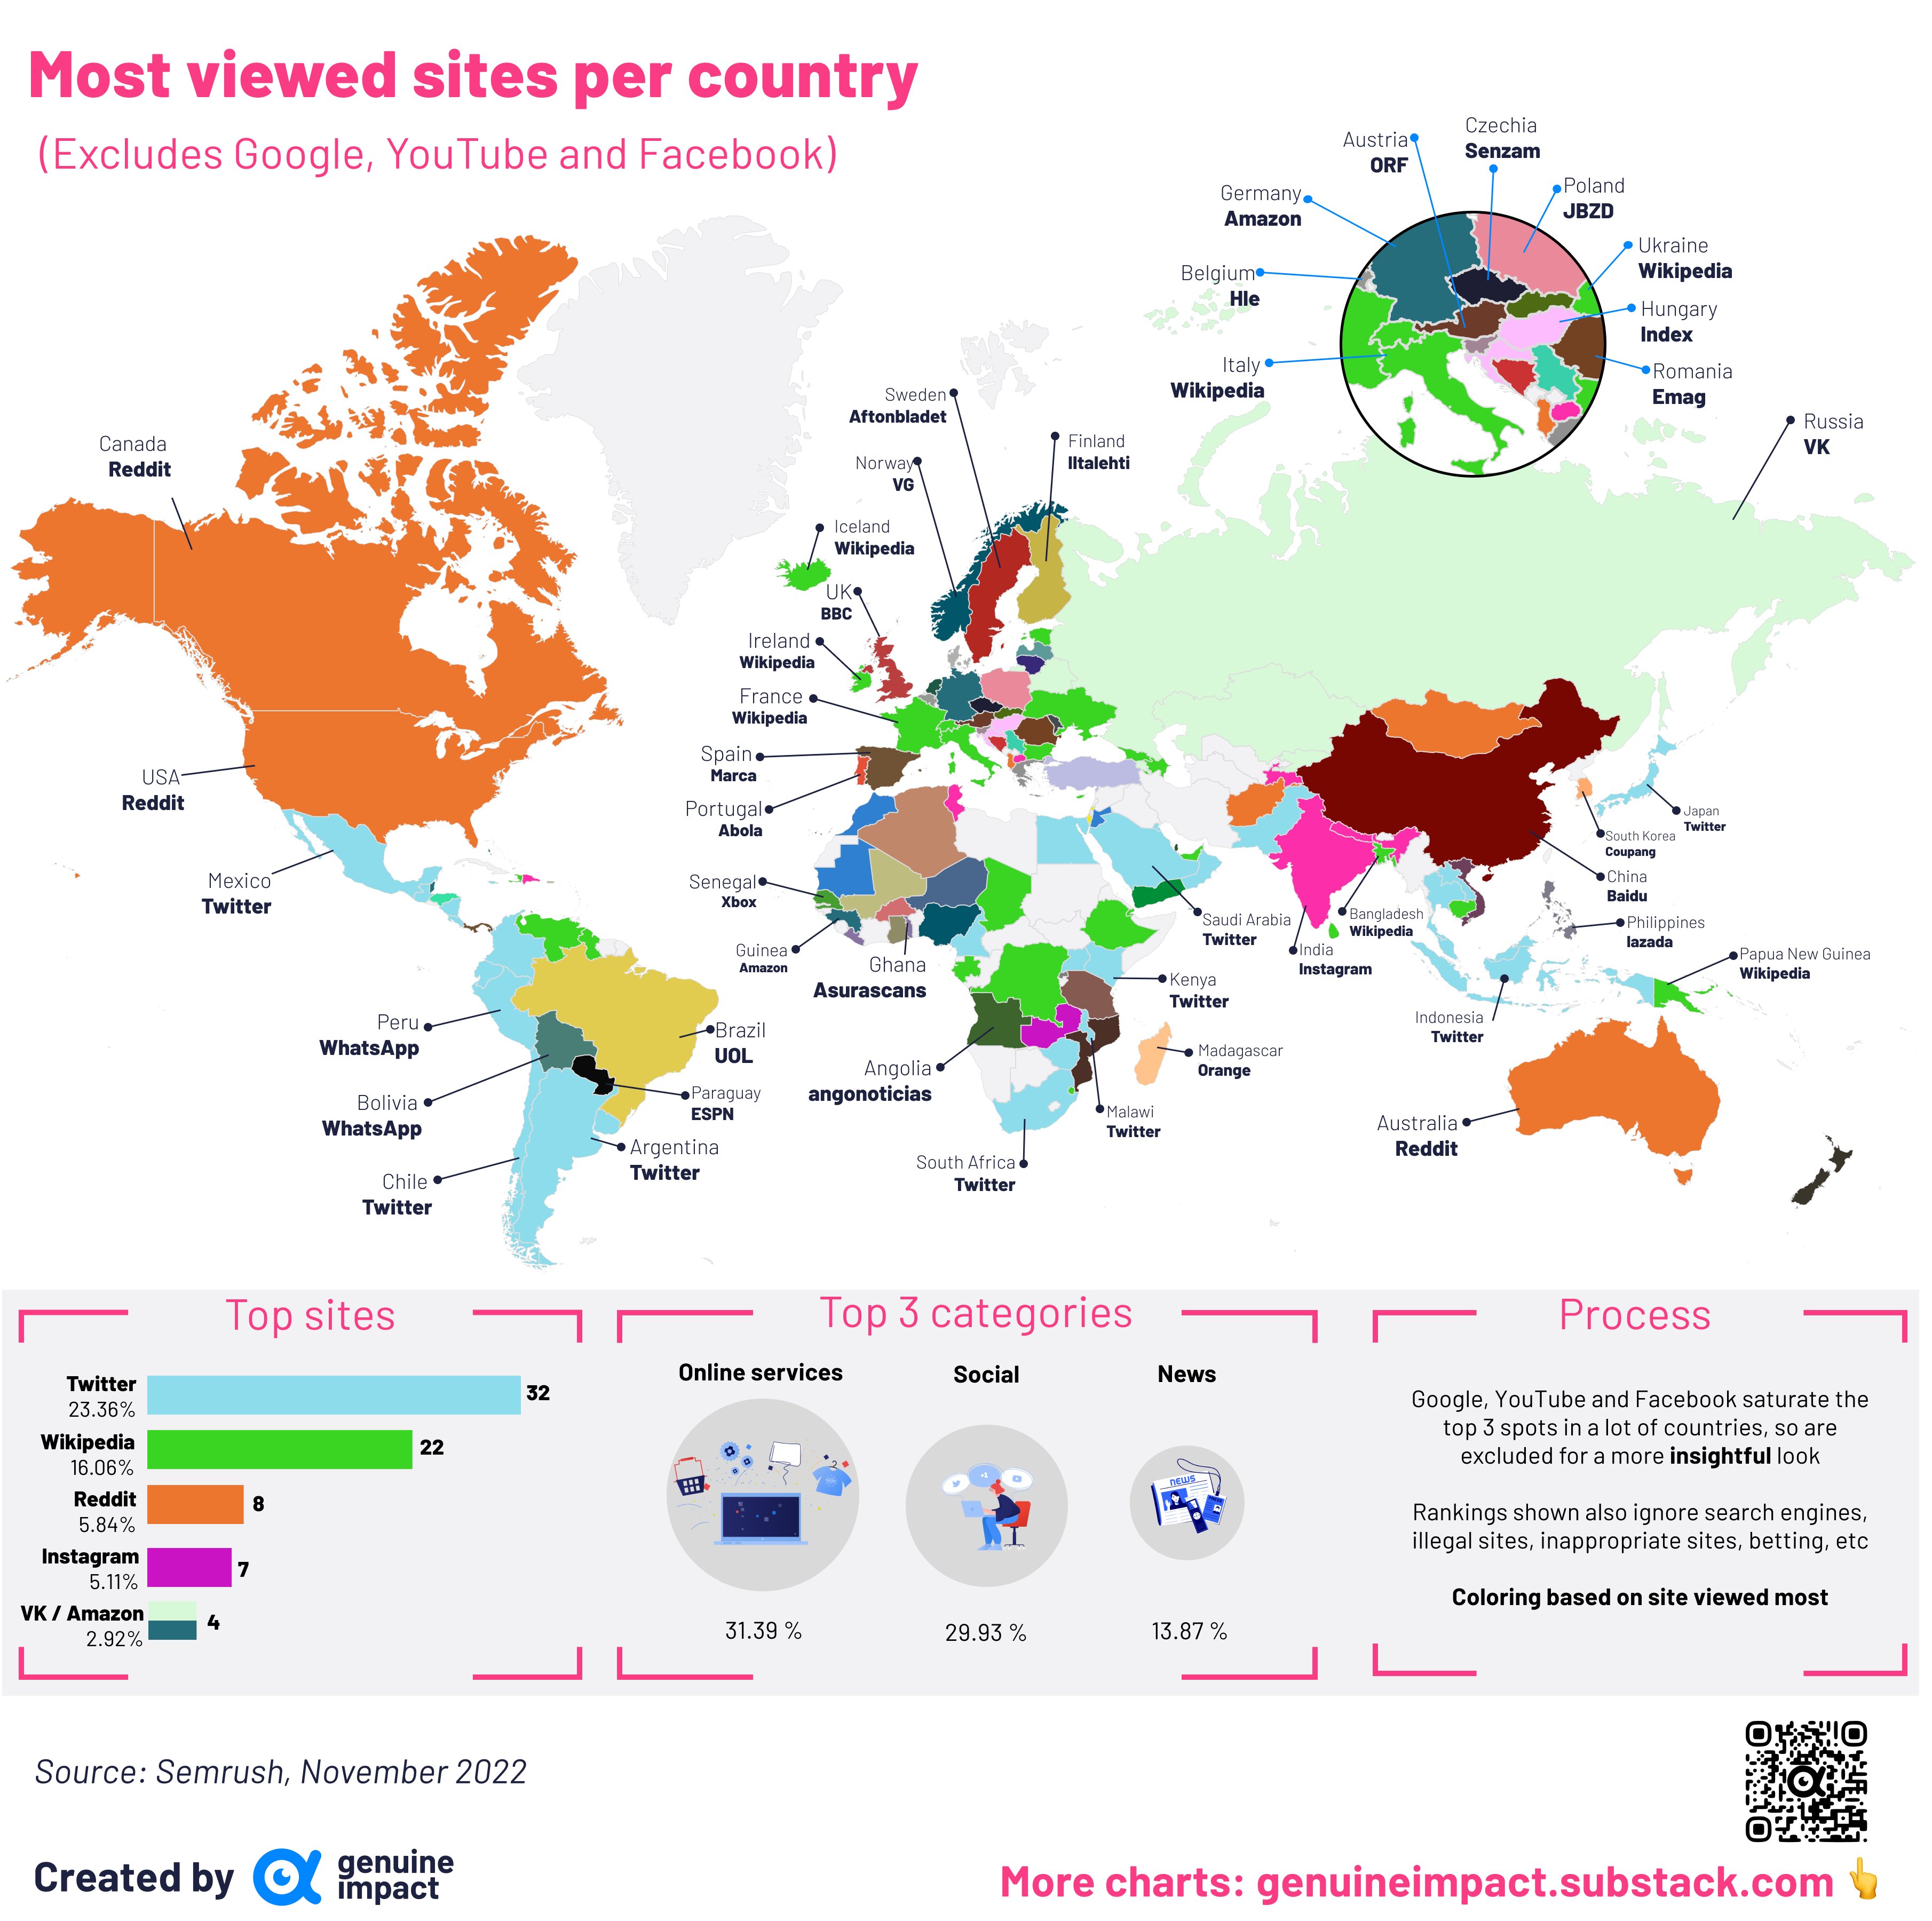 Which country is not using Google?